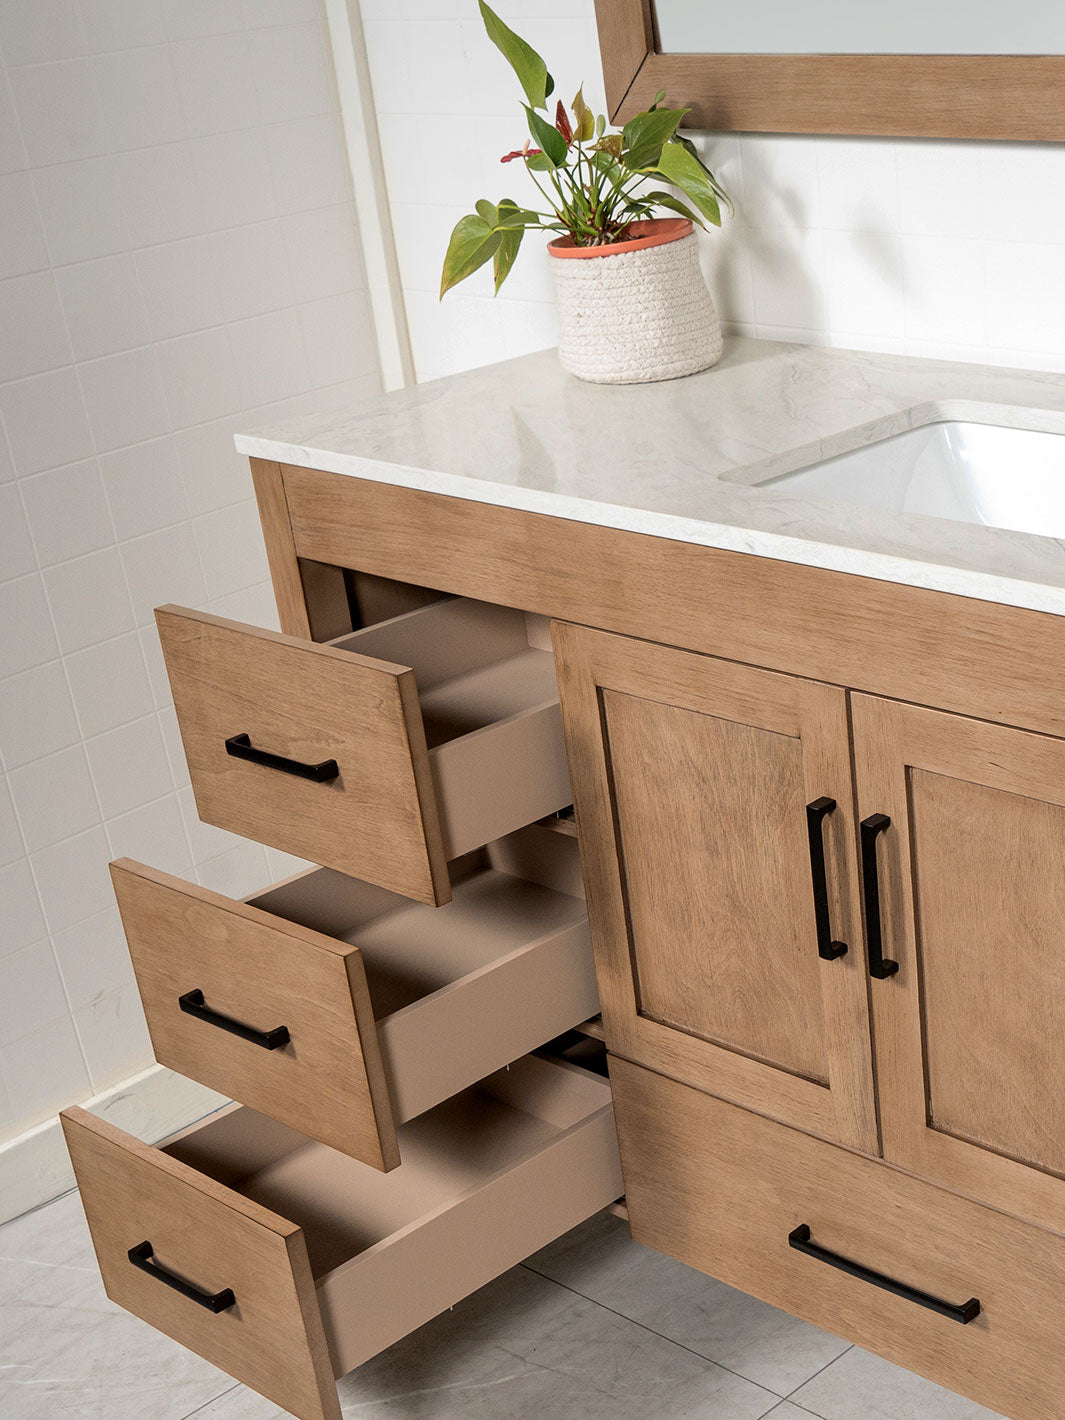 Drawers of vanity open to show full extension